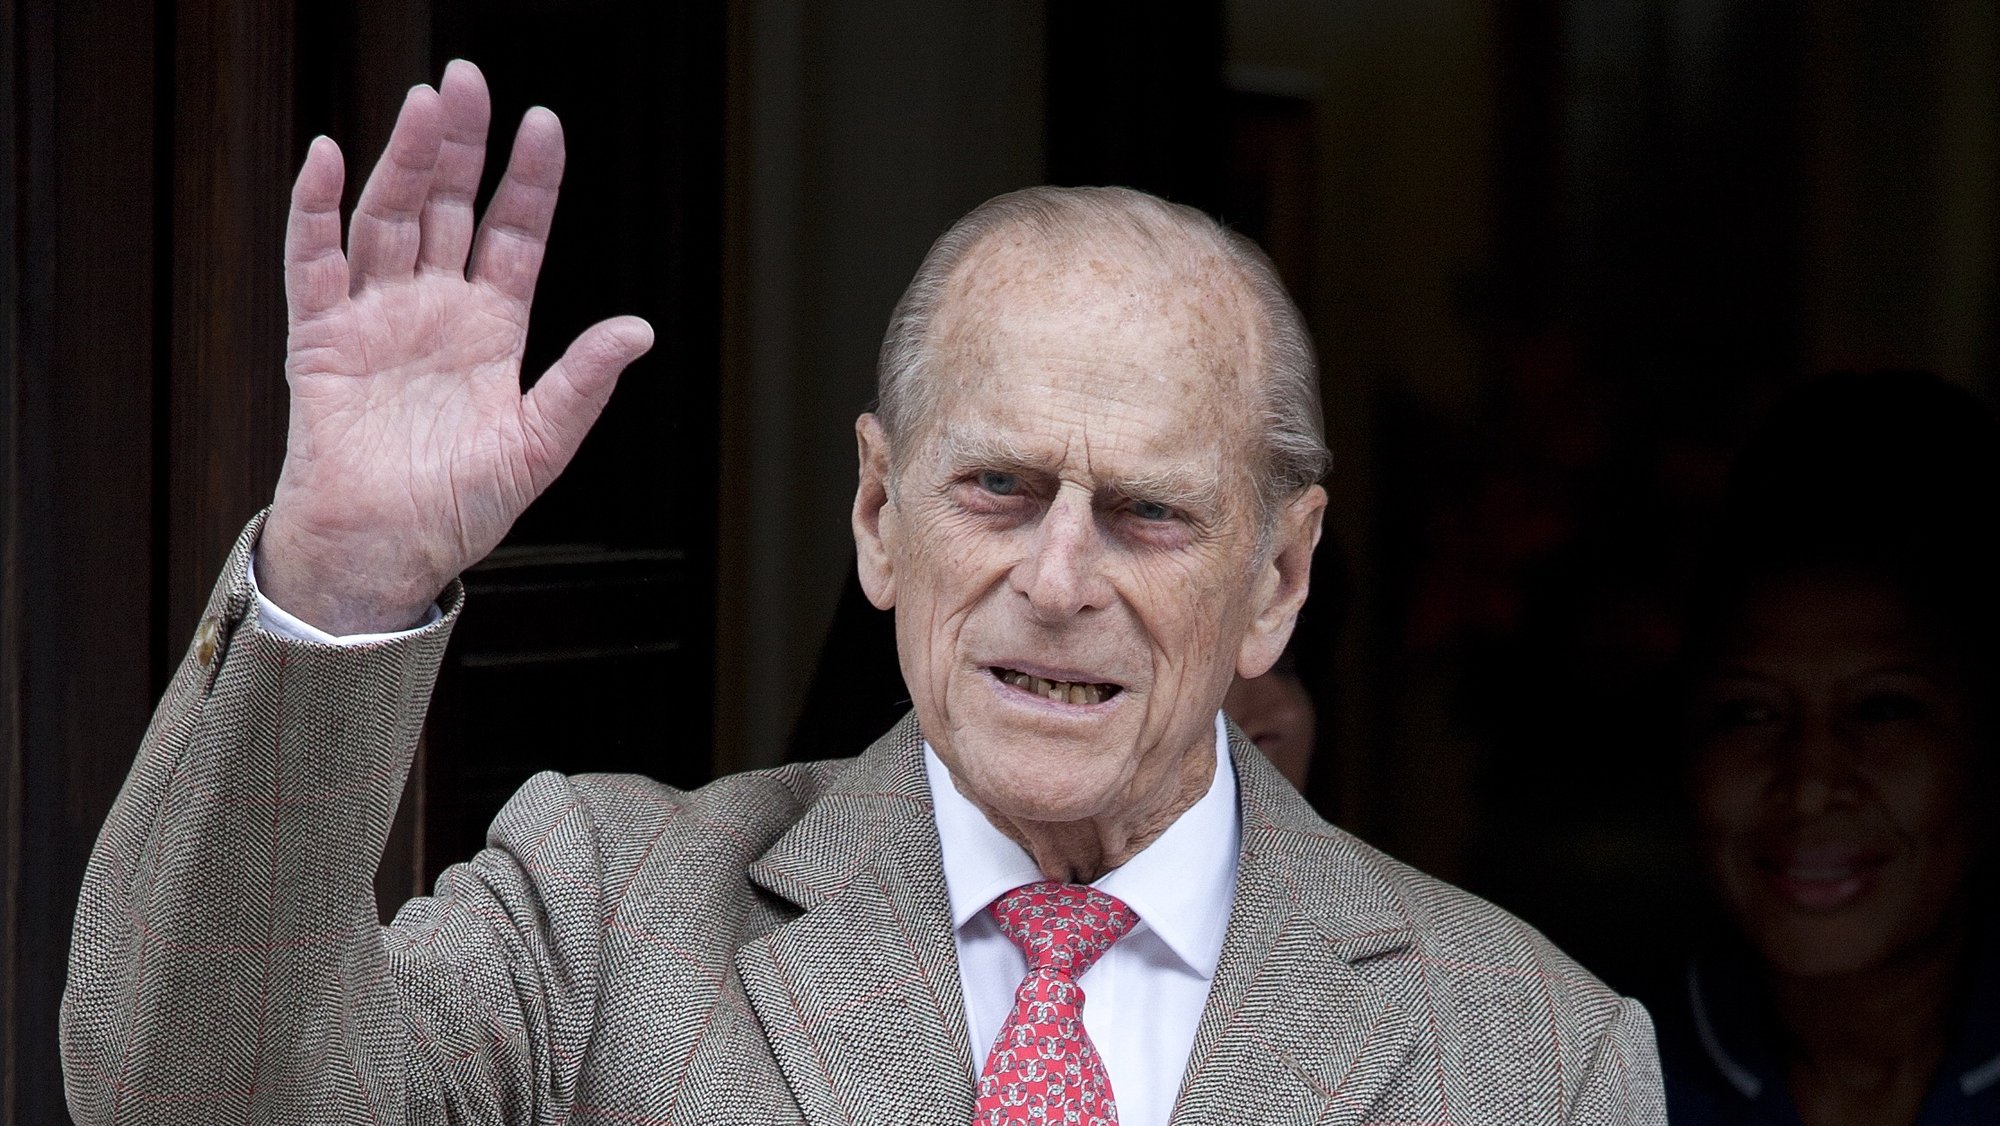 epa09018769 (FILE) Britain&#039;s Prince Philip, the Duke of Edinburgh waves as he is discharged from the King Edward VII hospital in central London, Britain, 09 June 2012 (reissued 17 February 2020).  According to Buckingham Palace, Britain&#039;s Prince Philip, the Duke of Edinburgh, has been admitted to a hospital in London, as a precautionary measure.  EPA/KAREL PRINSLOO